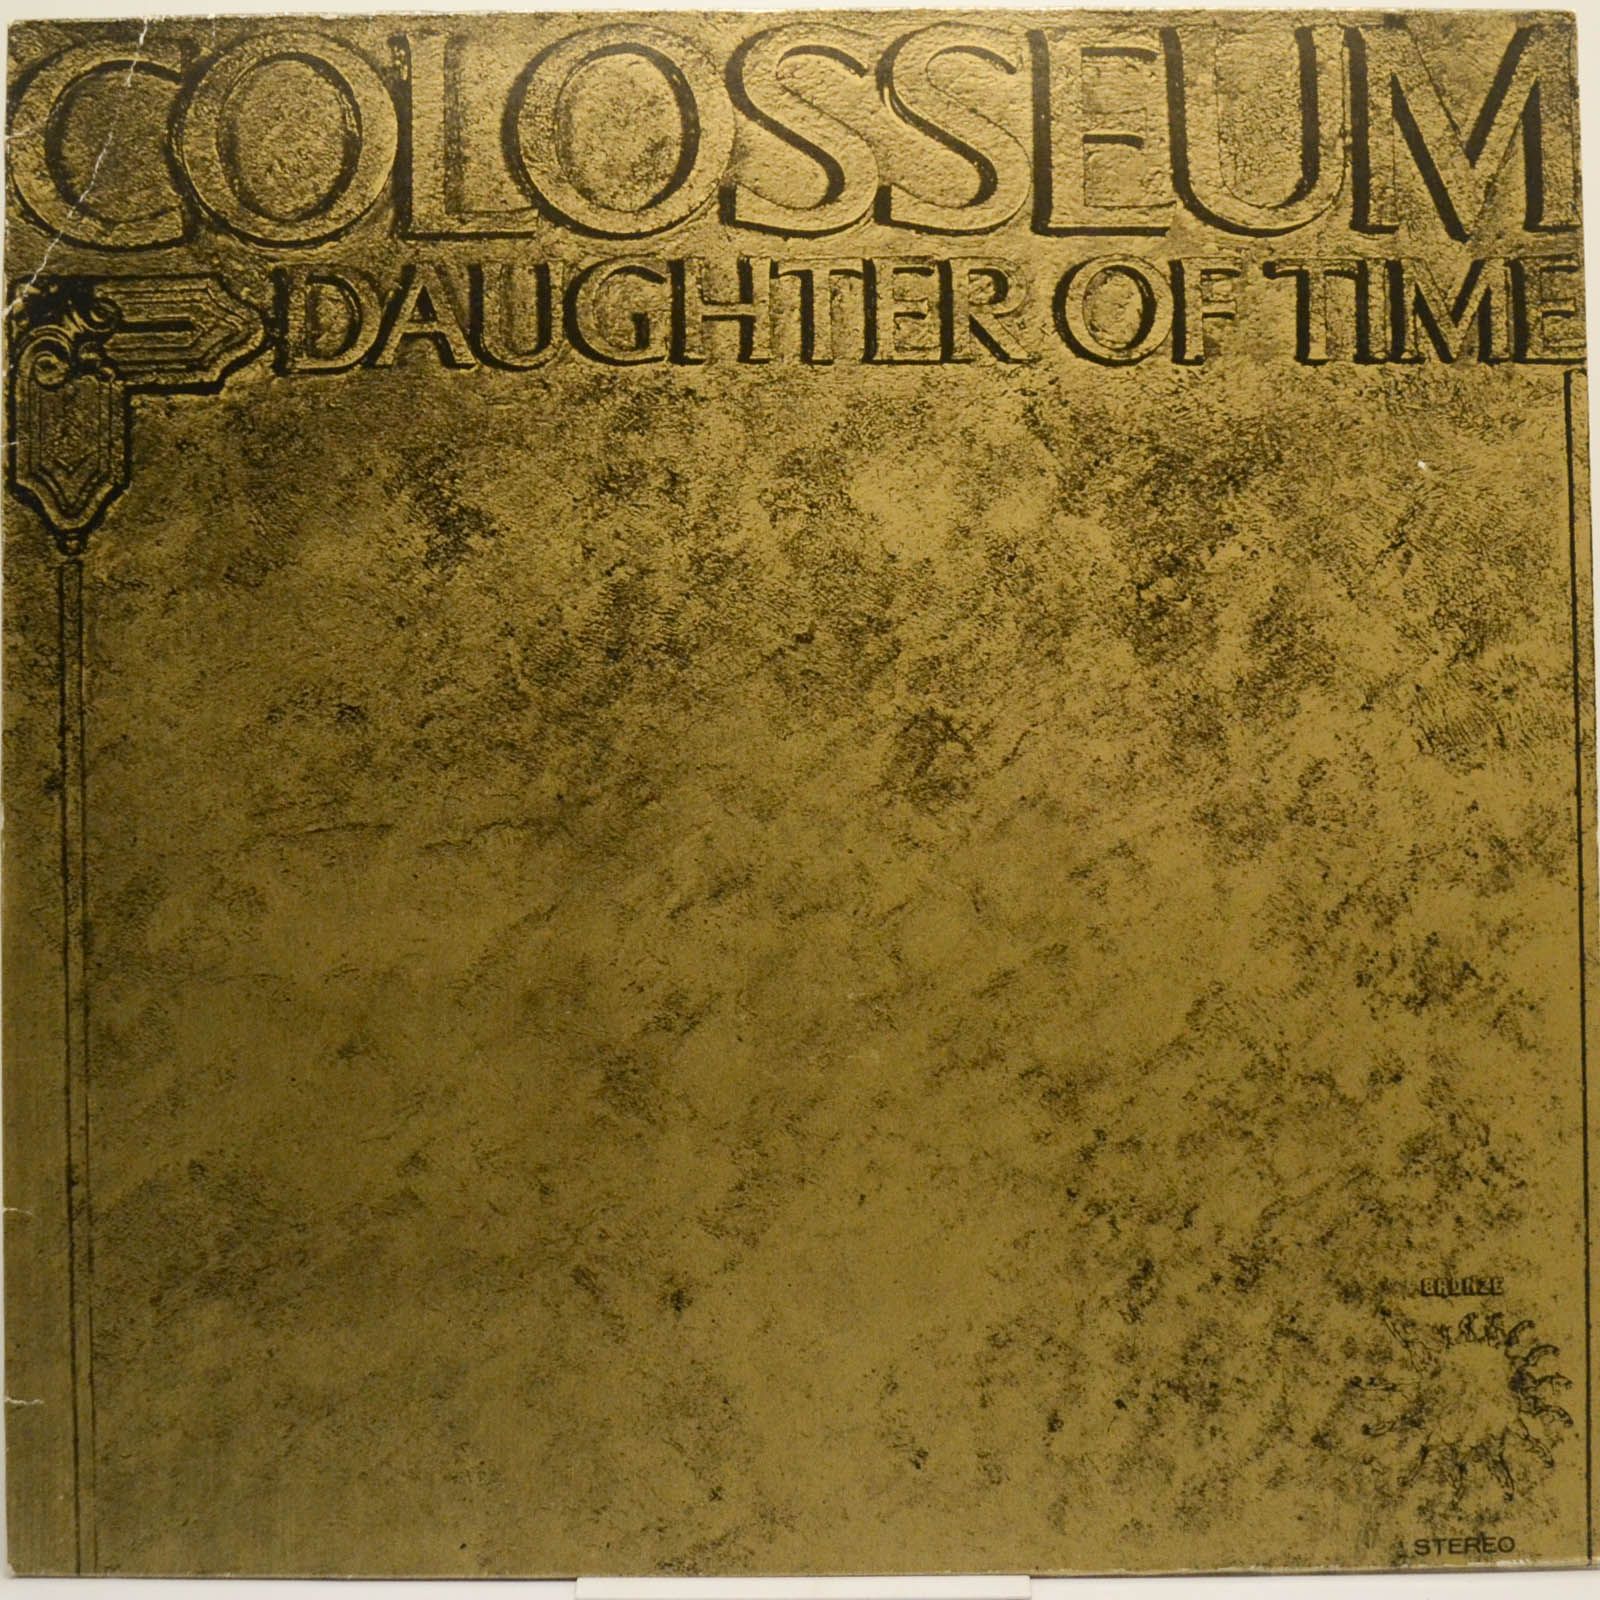 Colosseum — Daughter Of Time, 1970